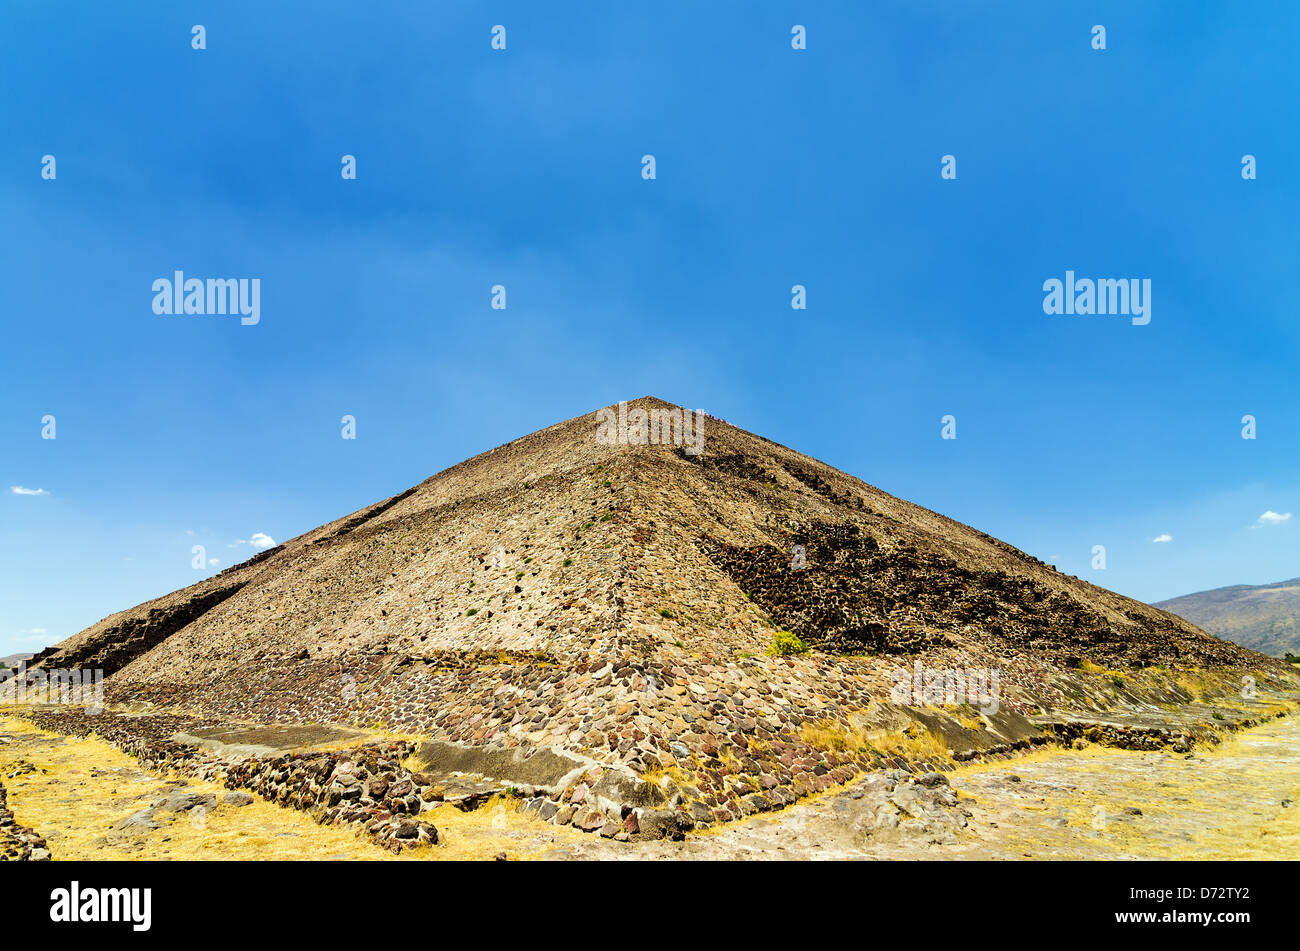 Pyramid of the Sun at the ancient city of Teotihuacan near Mexico City Stock Photo